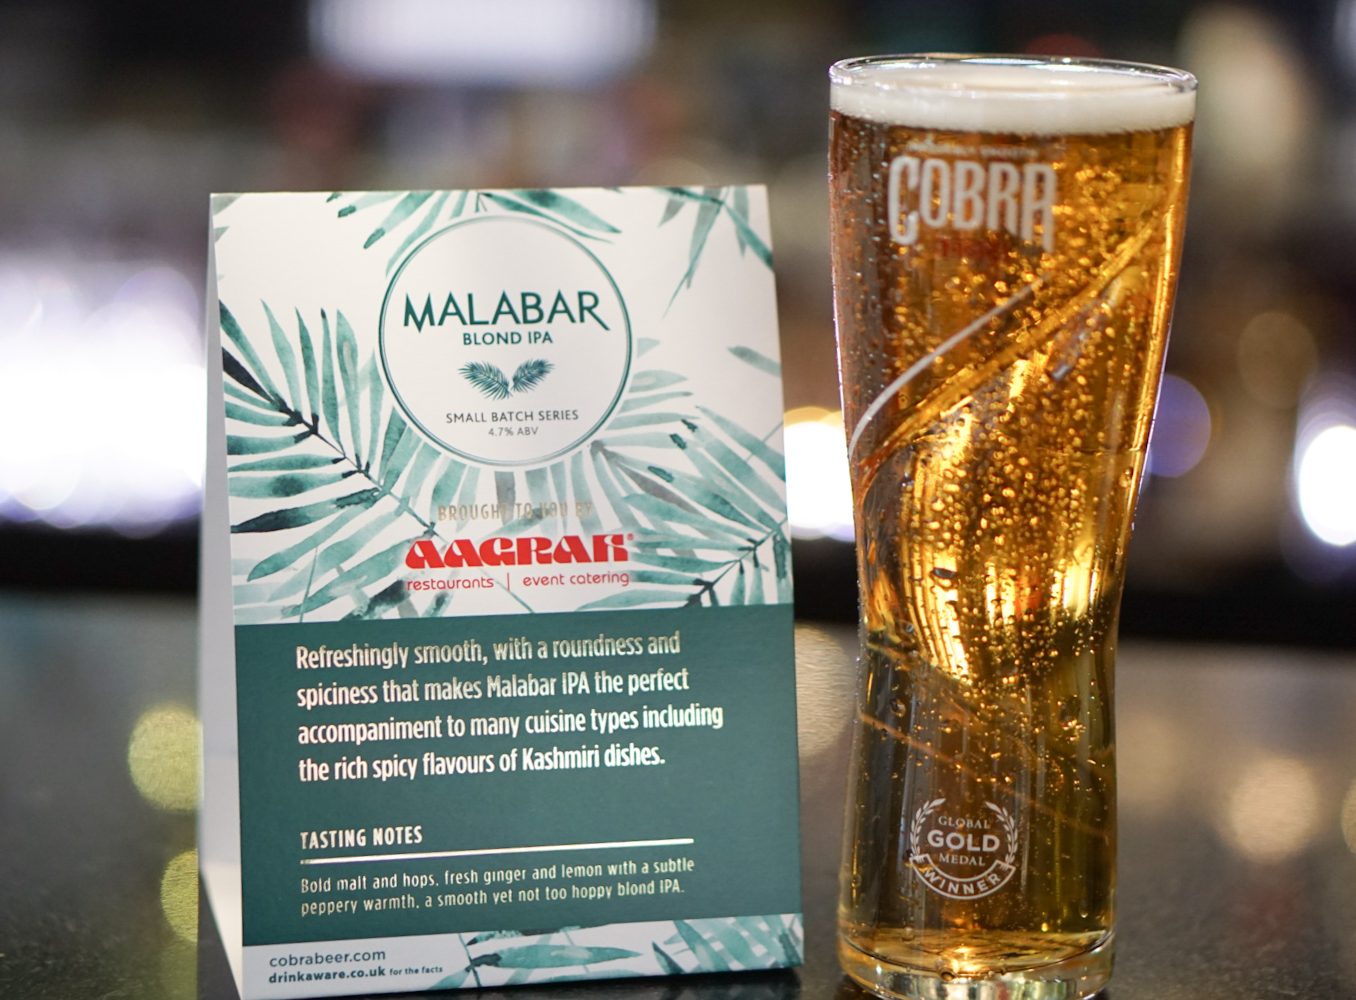 COBRA BEER LAUNCHES NEW BLOND IPA MALABAR IN…